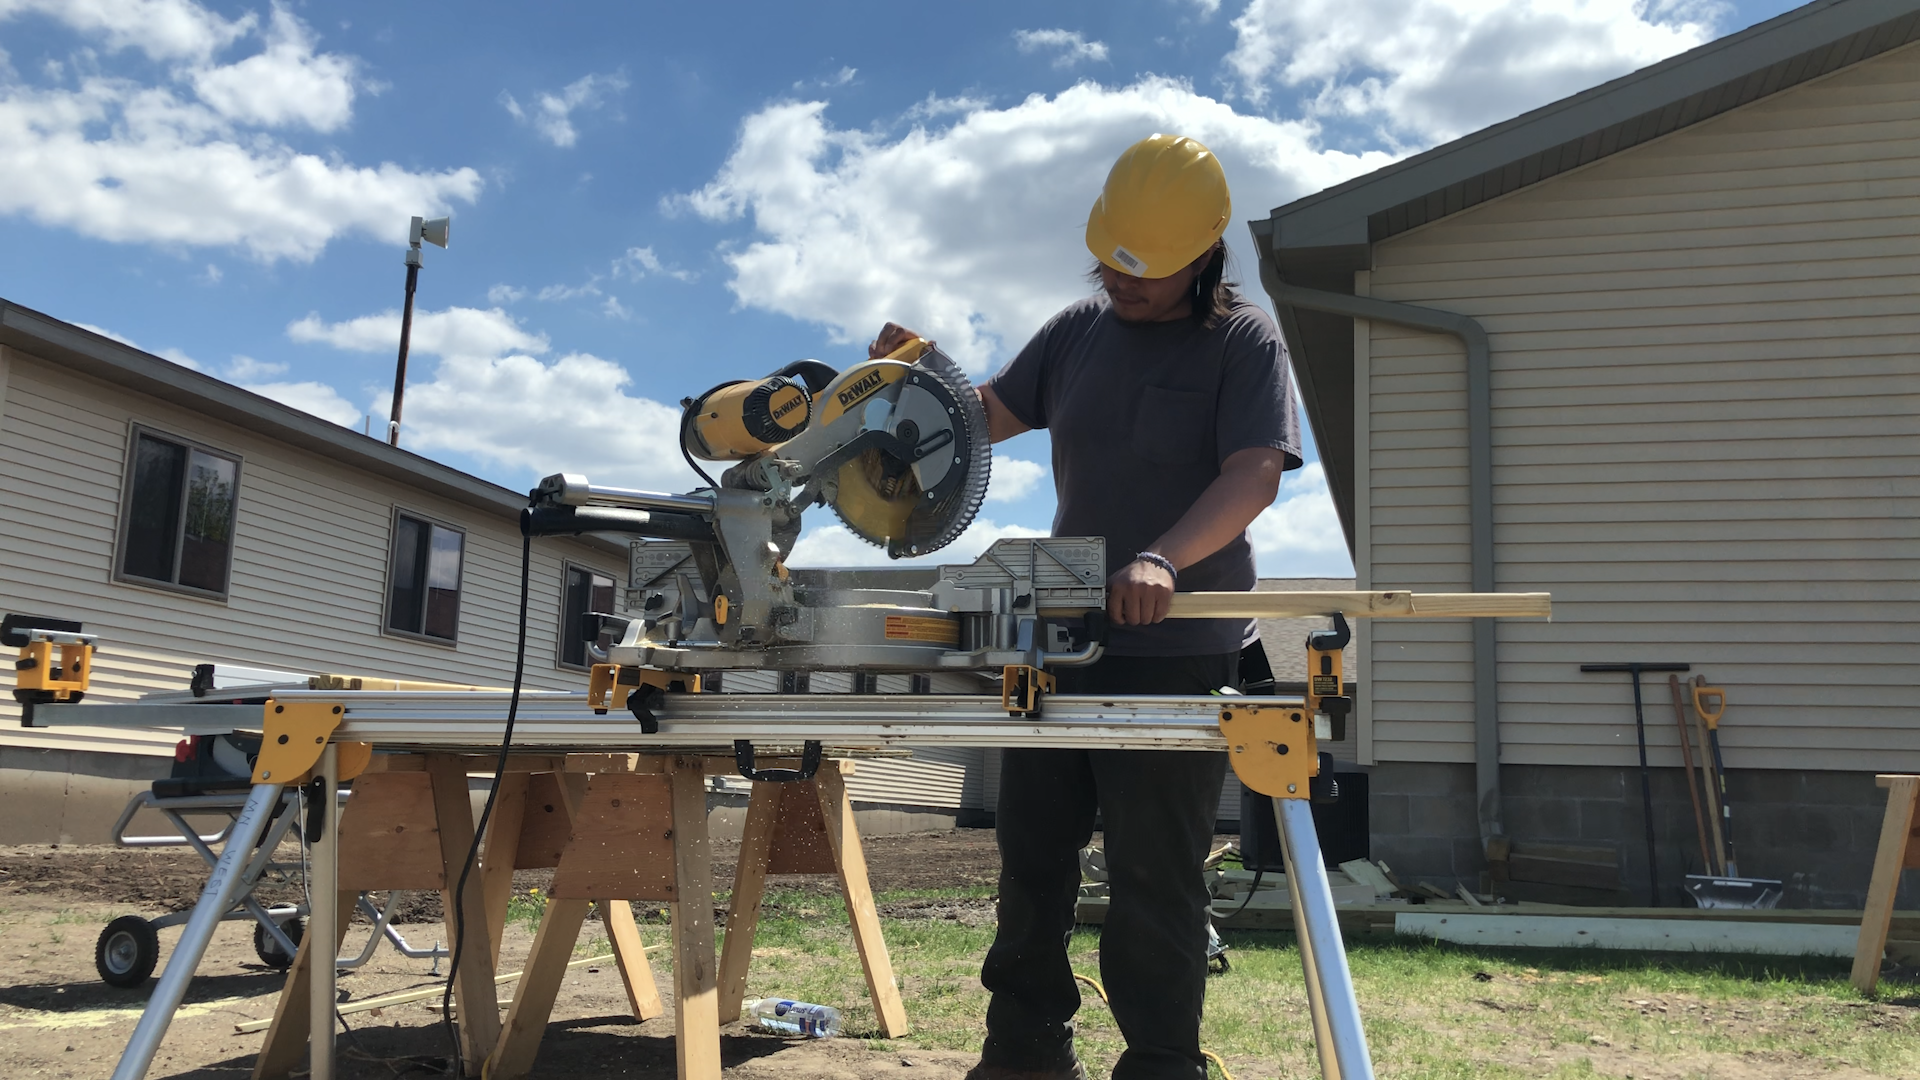 A photo of a student in the construction trades using a saw.